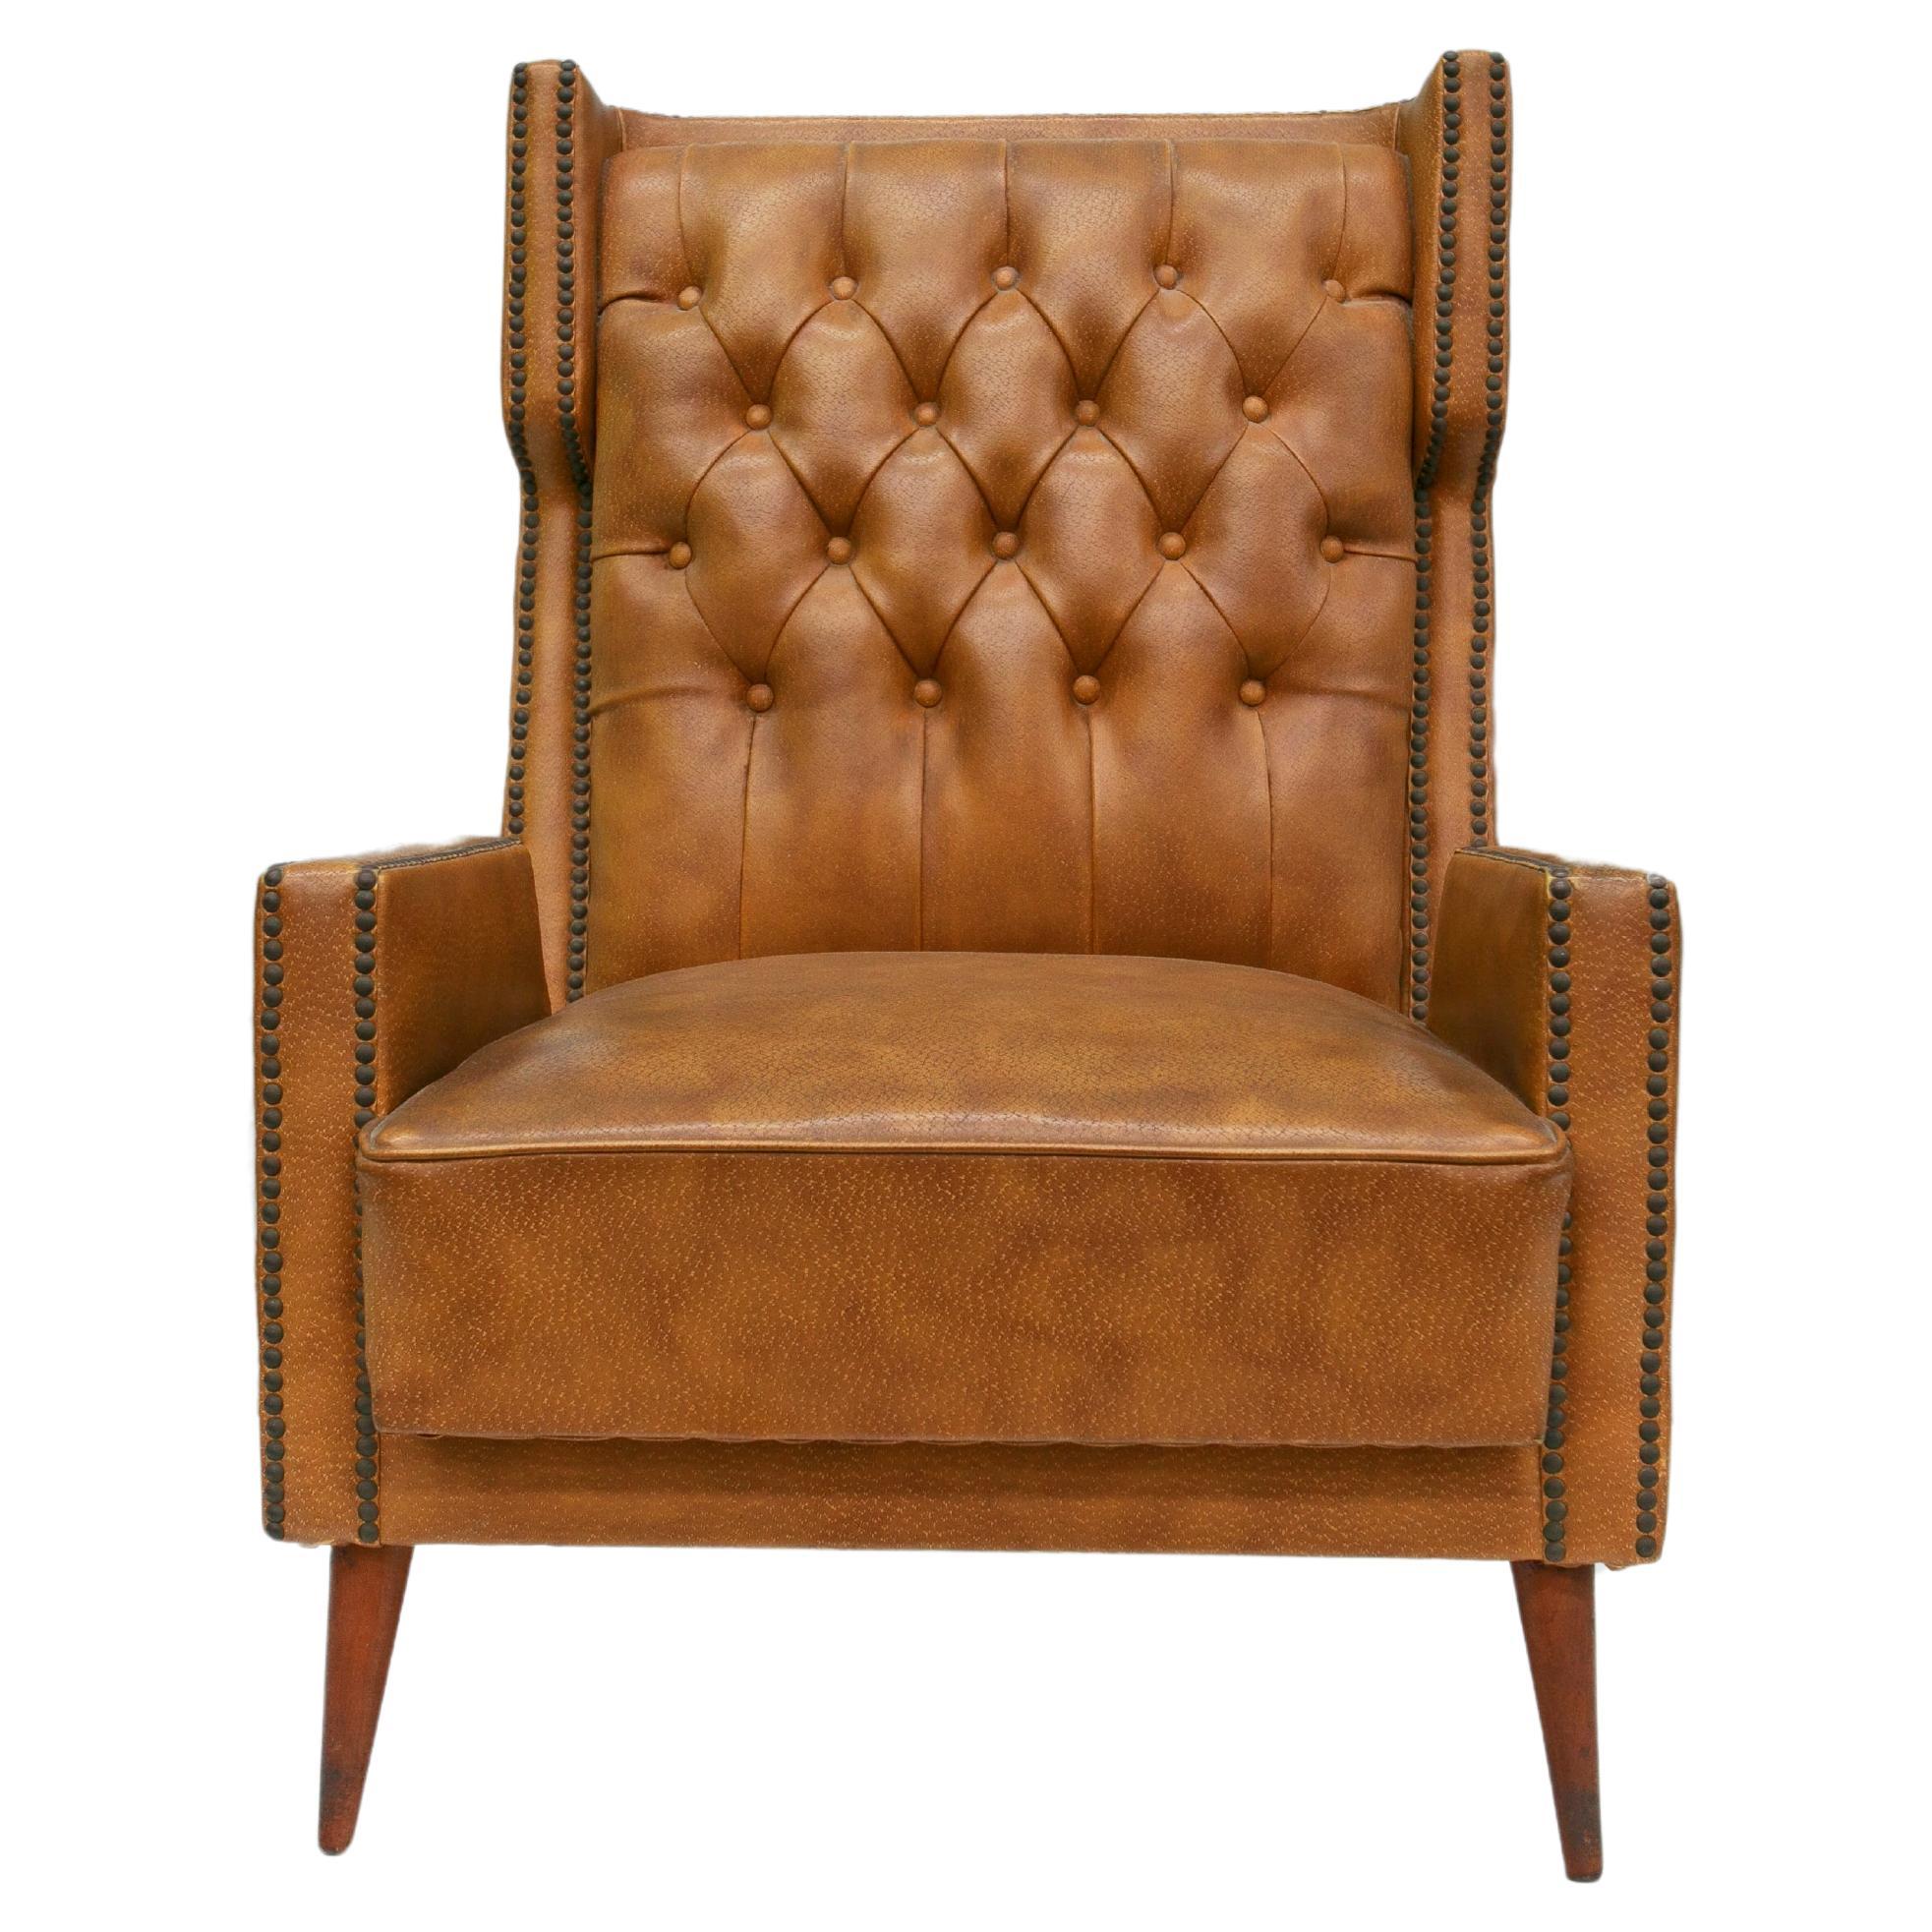 Brazilian Modern Armchair in Hardwood, Brown Leatherette, G. Scapinelli, 1950s For Sale